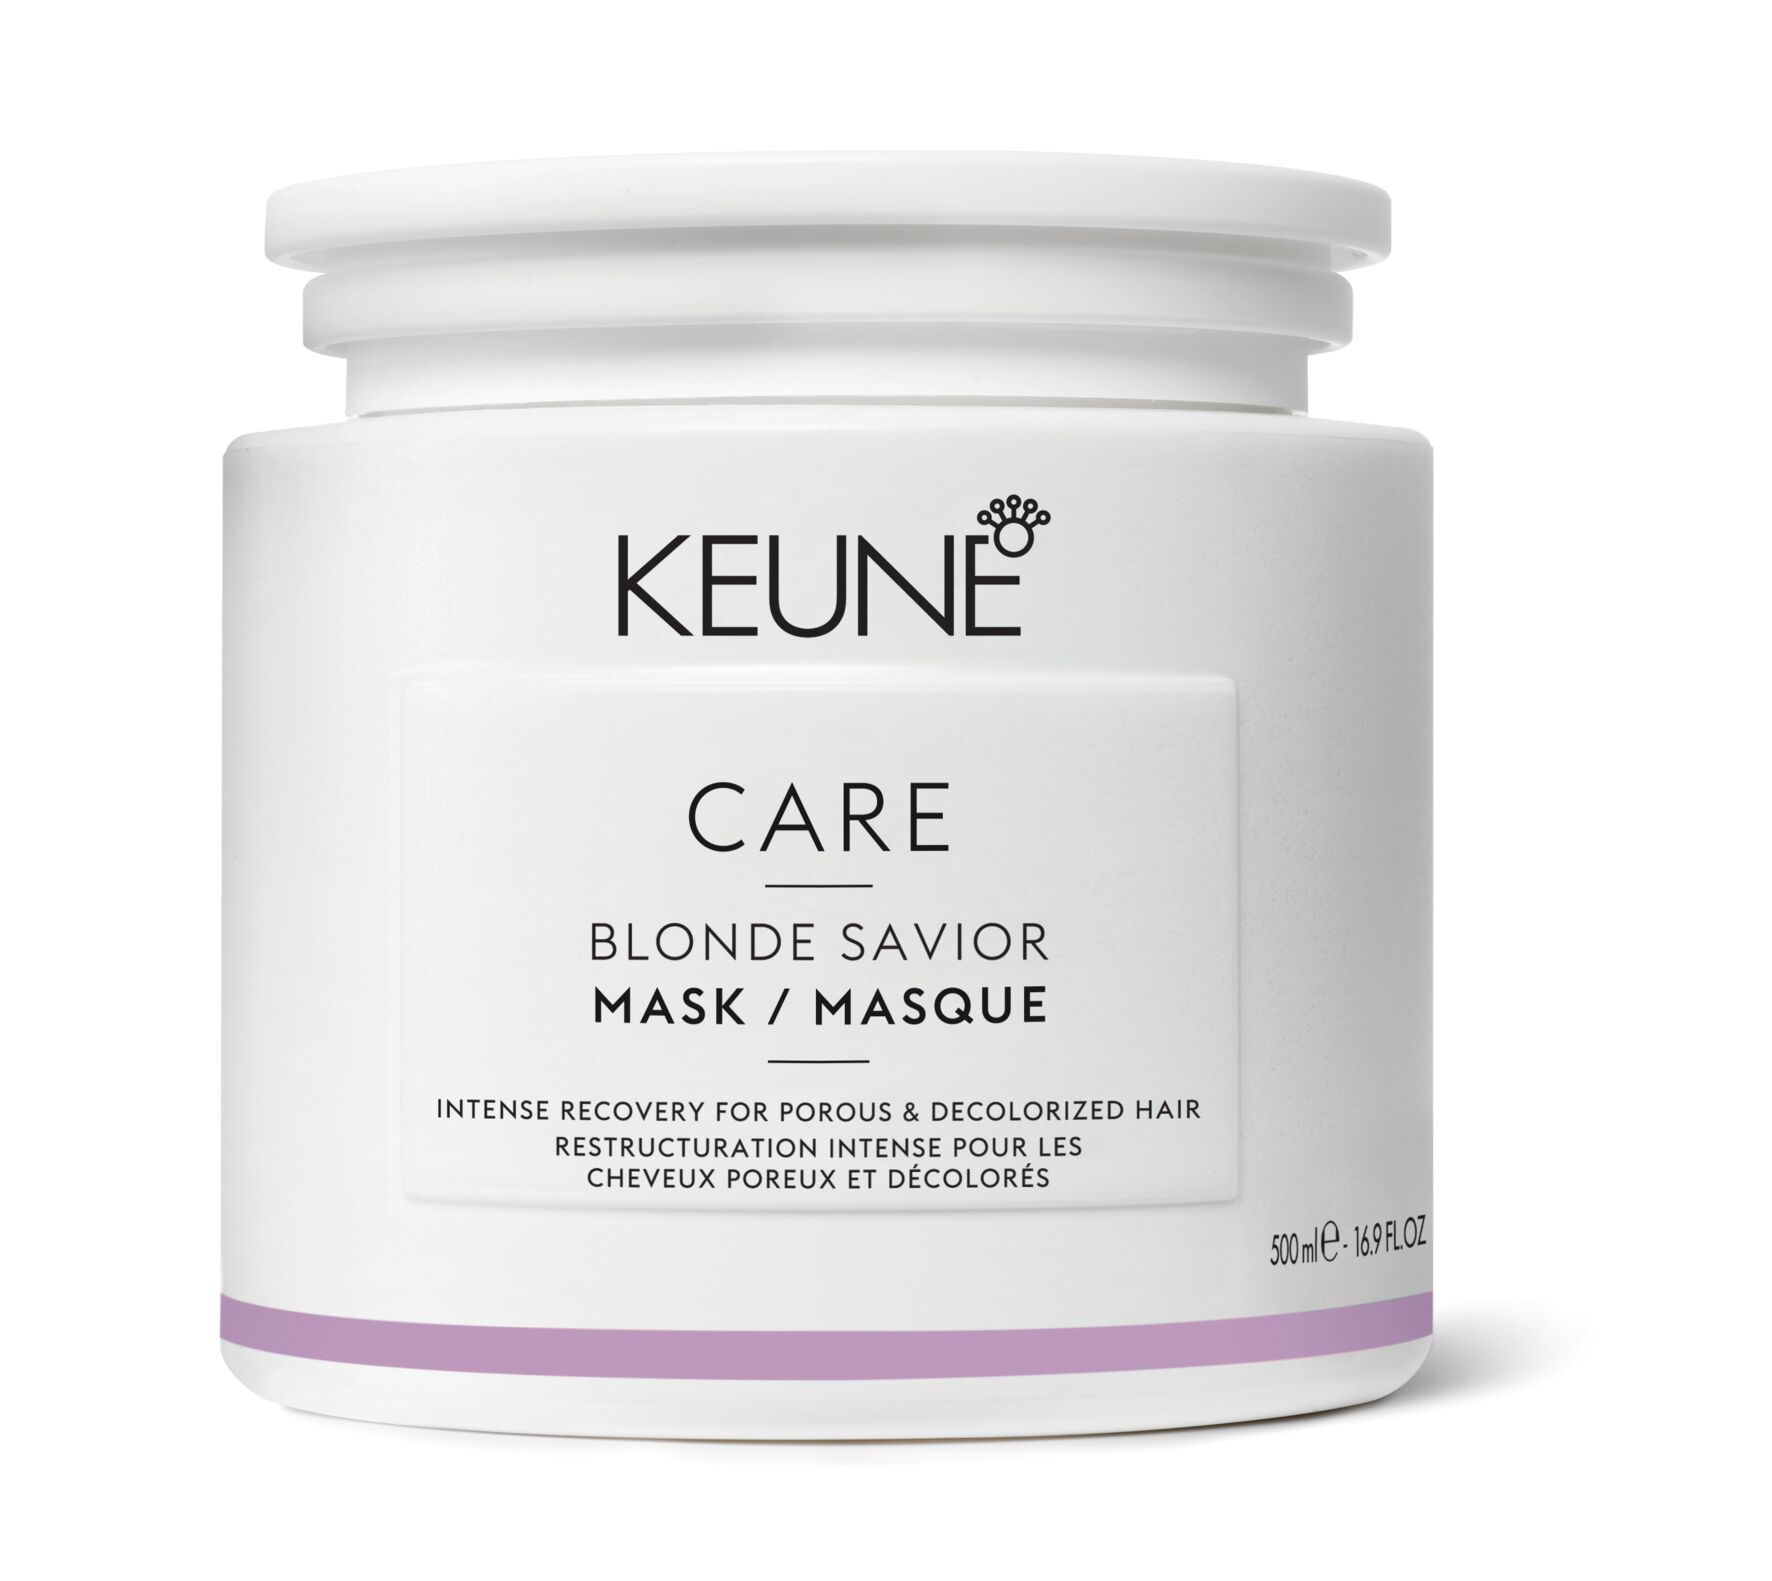 Discover the BLONDE SAVIOR MASK - an intensive hair mask for damaged, bleached hair. Thanks to glycolic acid and creatine, it repairs the hair from the inner cortex and reduces hair breakage. Keune.ch